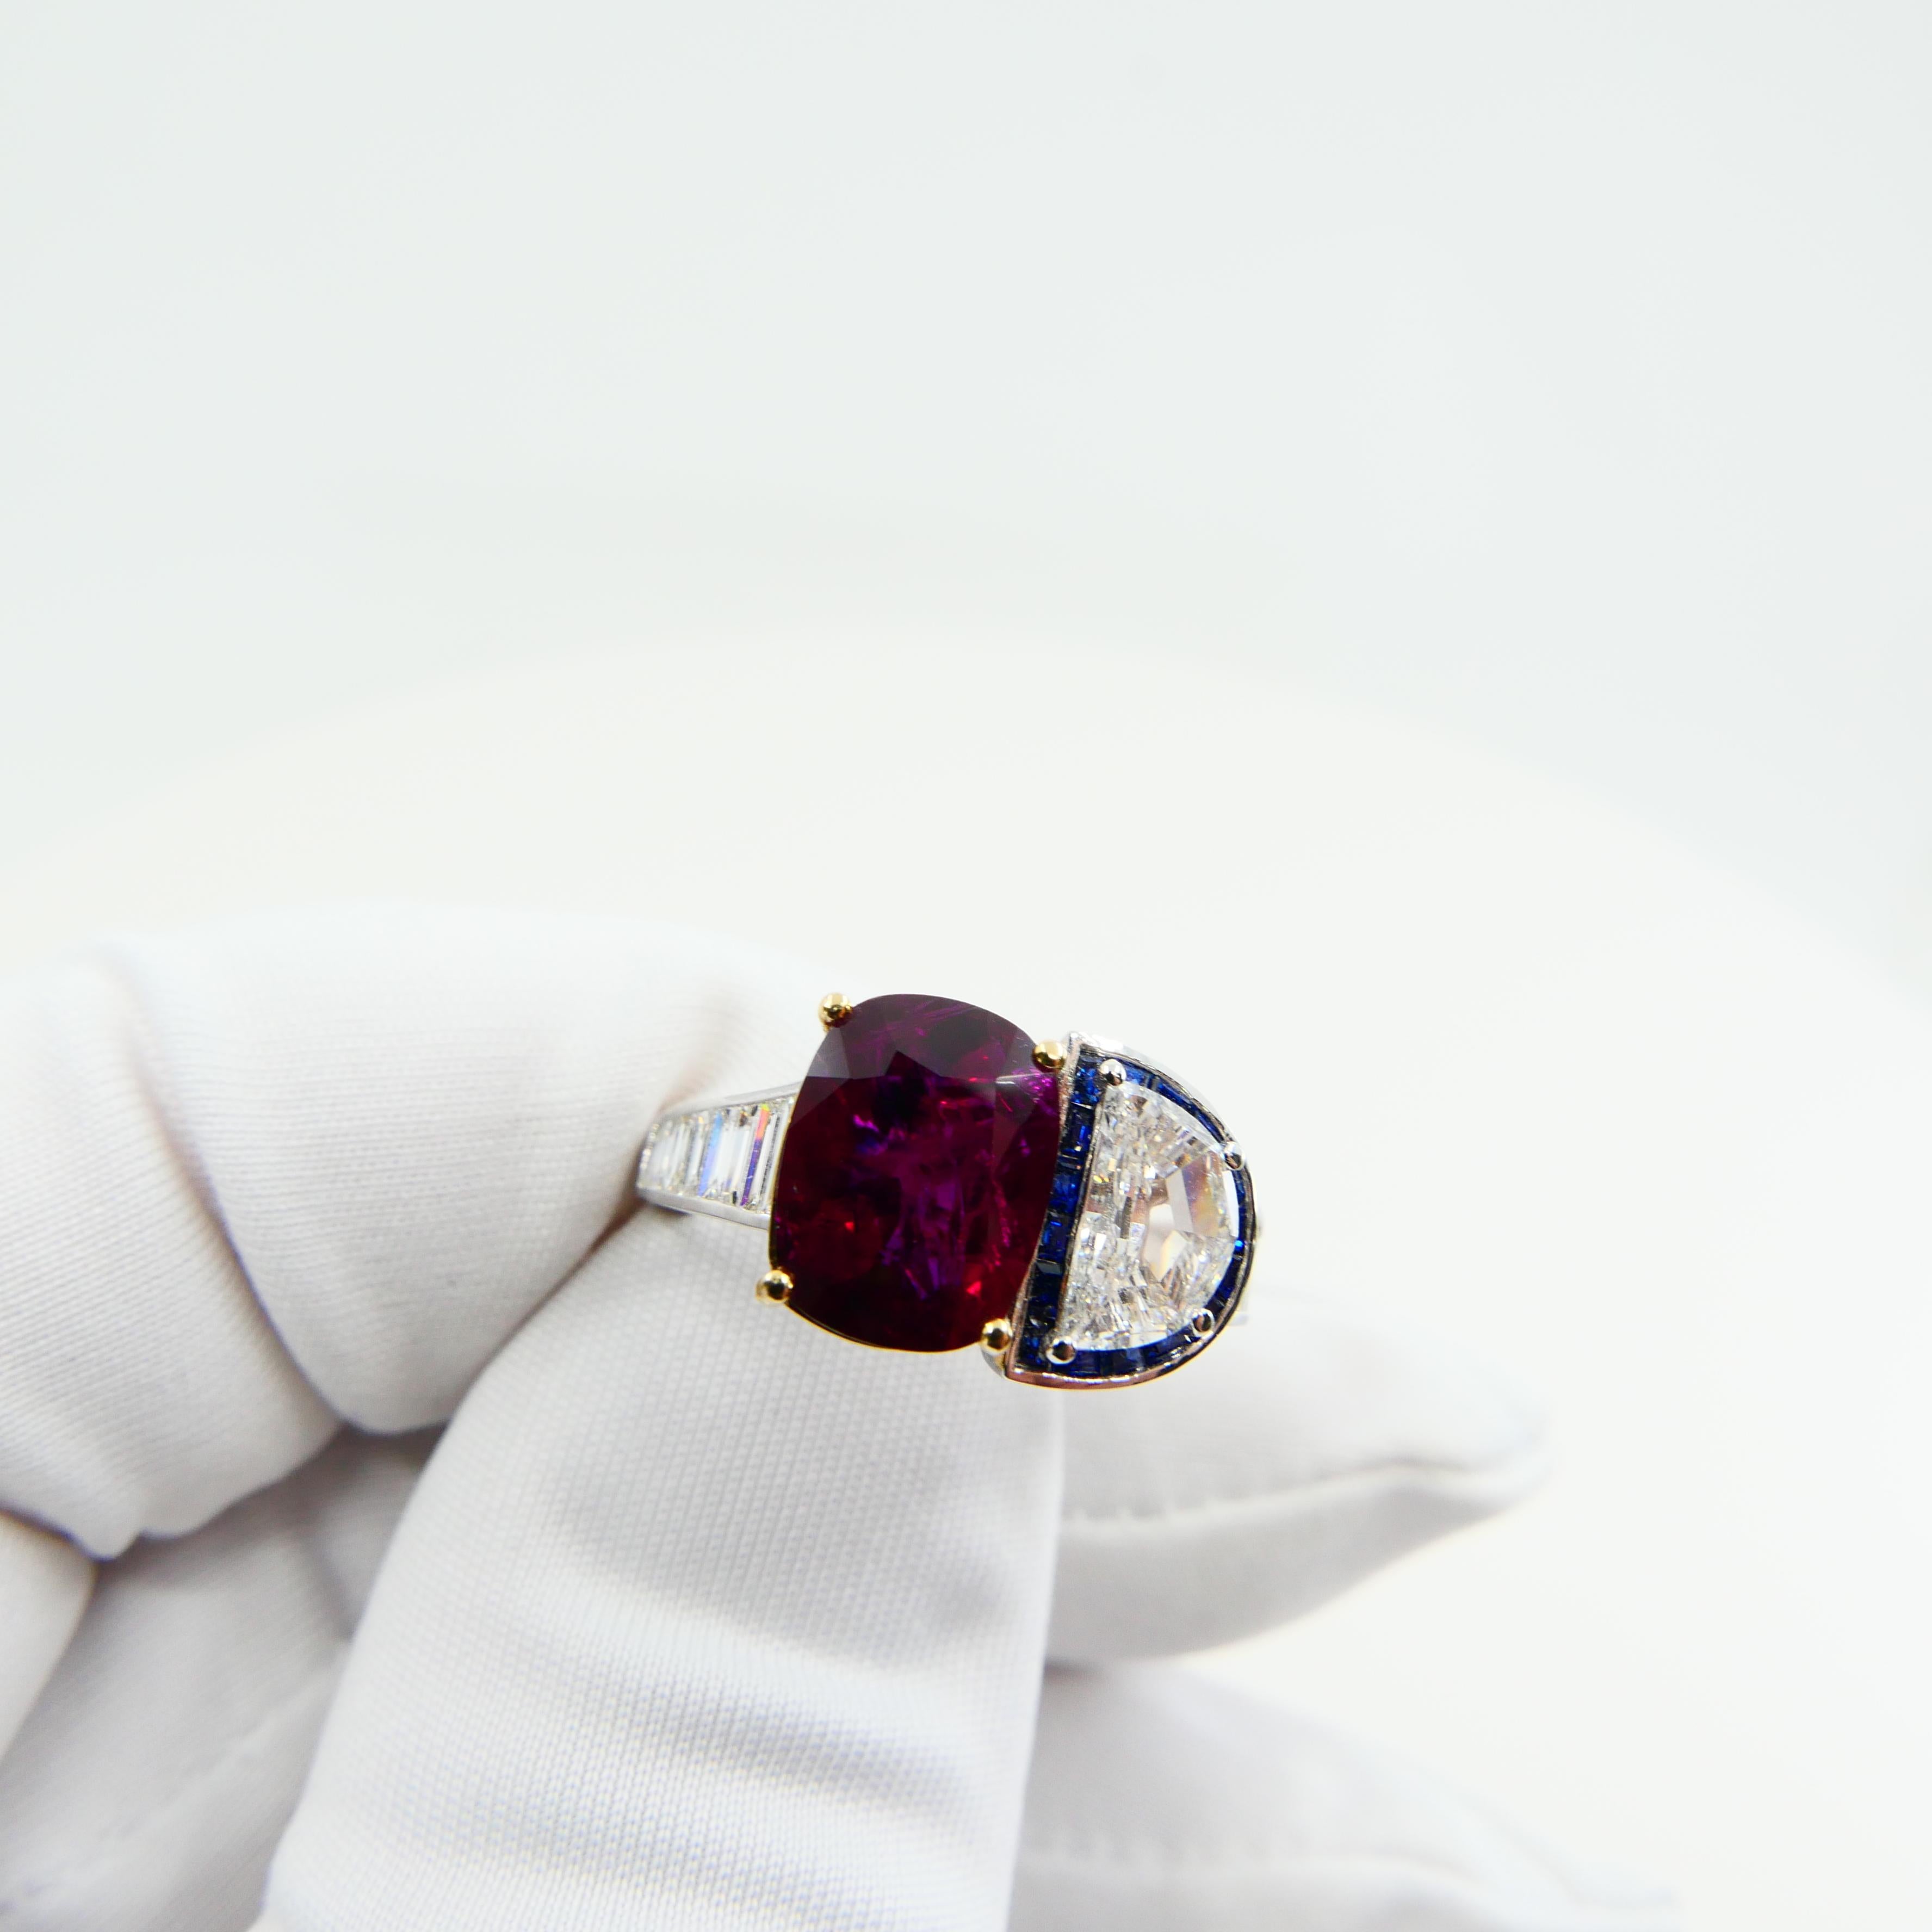 GRS Certified 2.4cts Burma No Heat Pigeon's Blood Red Ruby and Diamond Ring 8